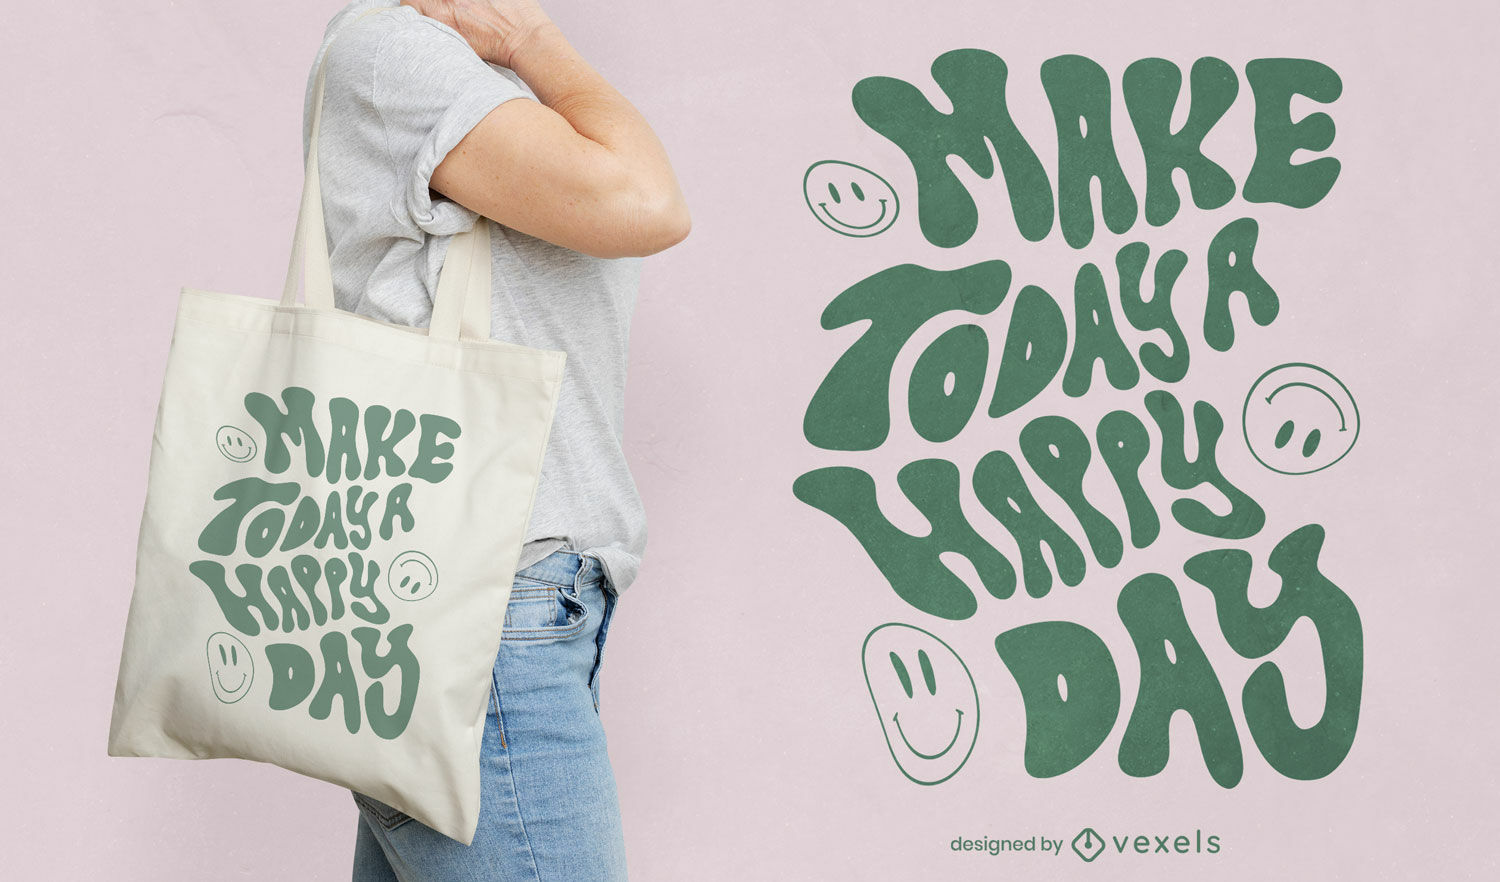 Positive groovy quote tote bag design